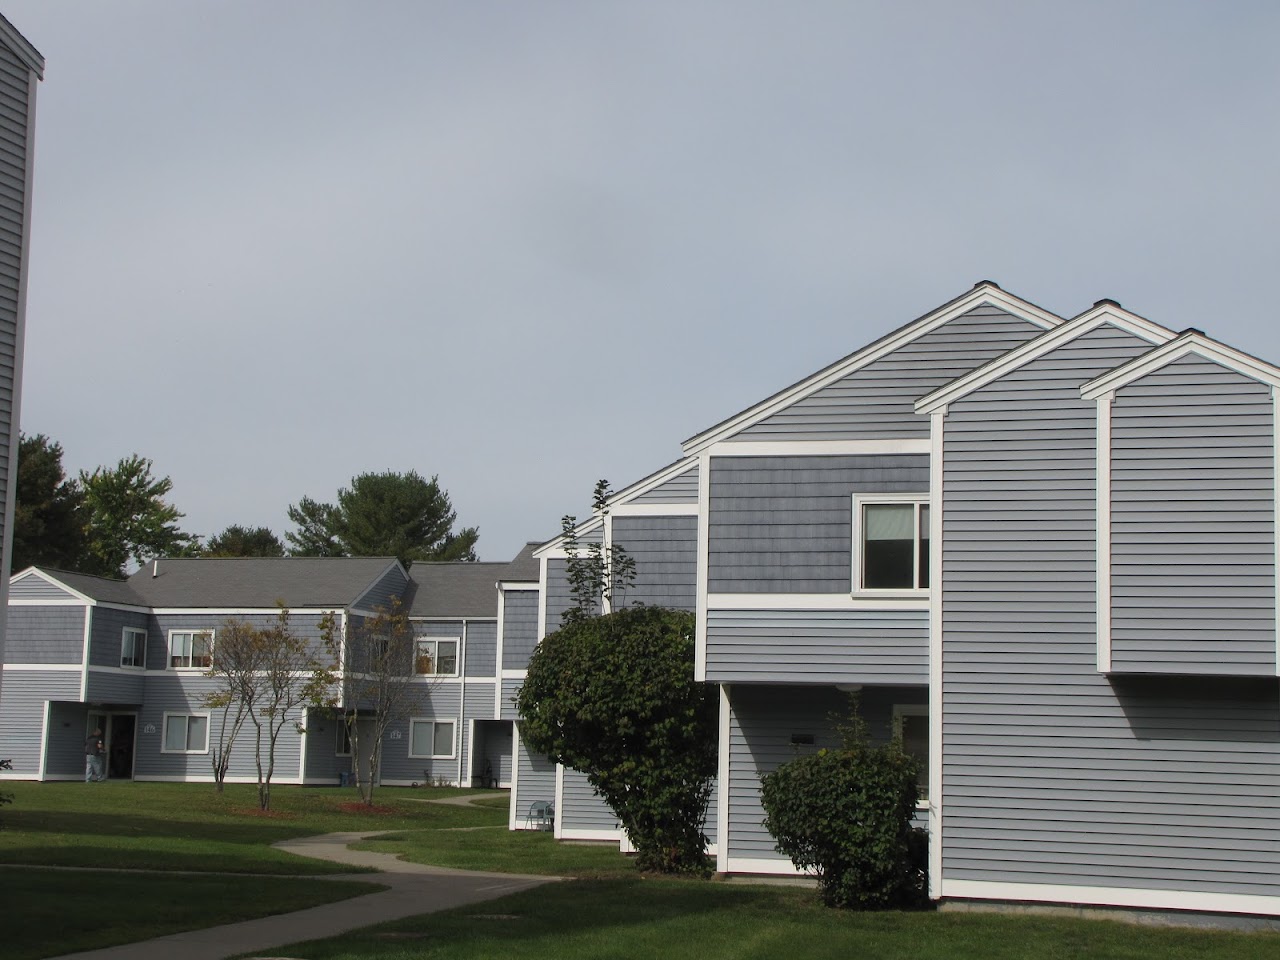 Photo of NEW ORCHARD HILL ESTATES. Affordable housing located at 220 ORCHARD HILL DR OXFORD, MA 01540